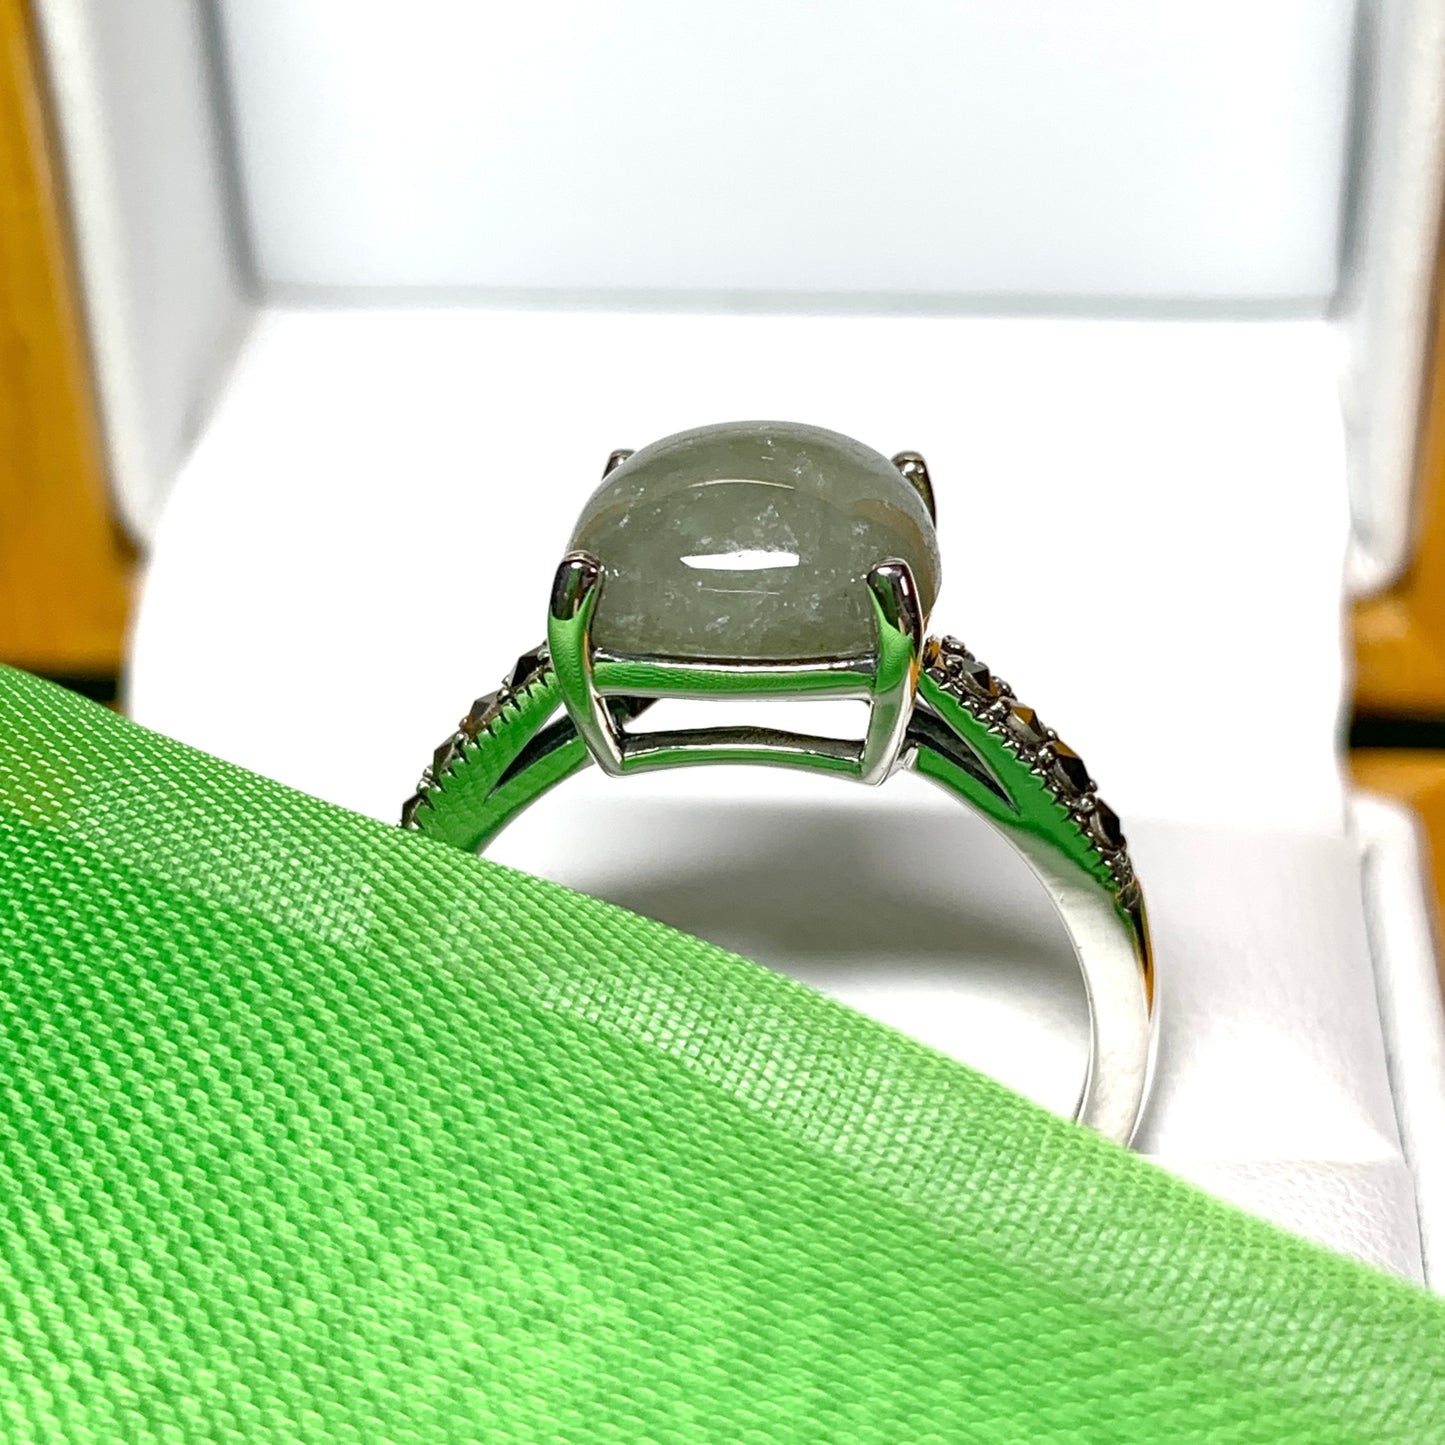 Square green jade and marcasite cushion shaped sterling silver ring